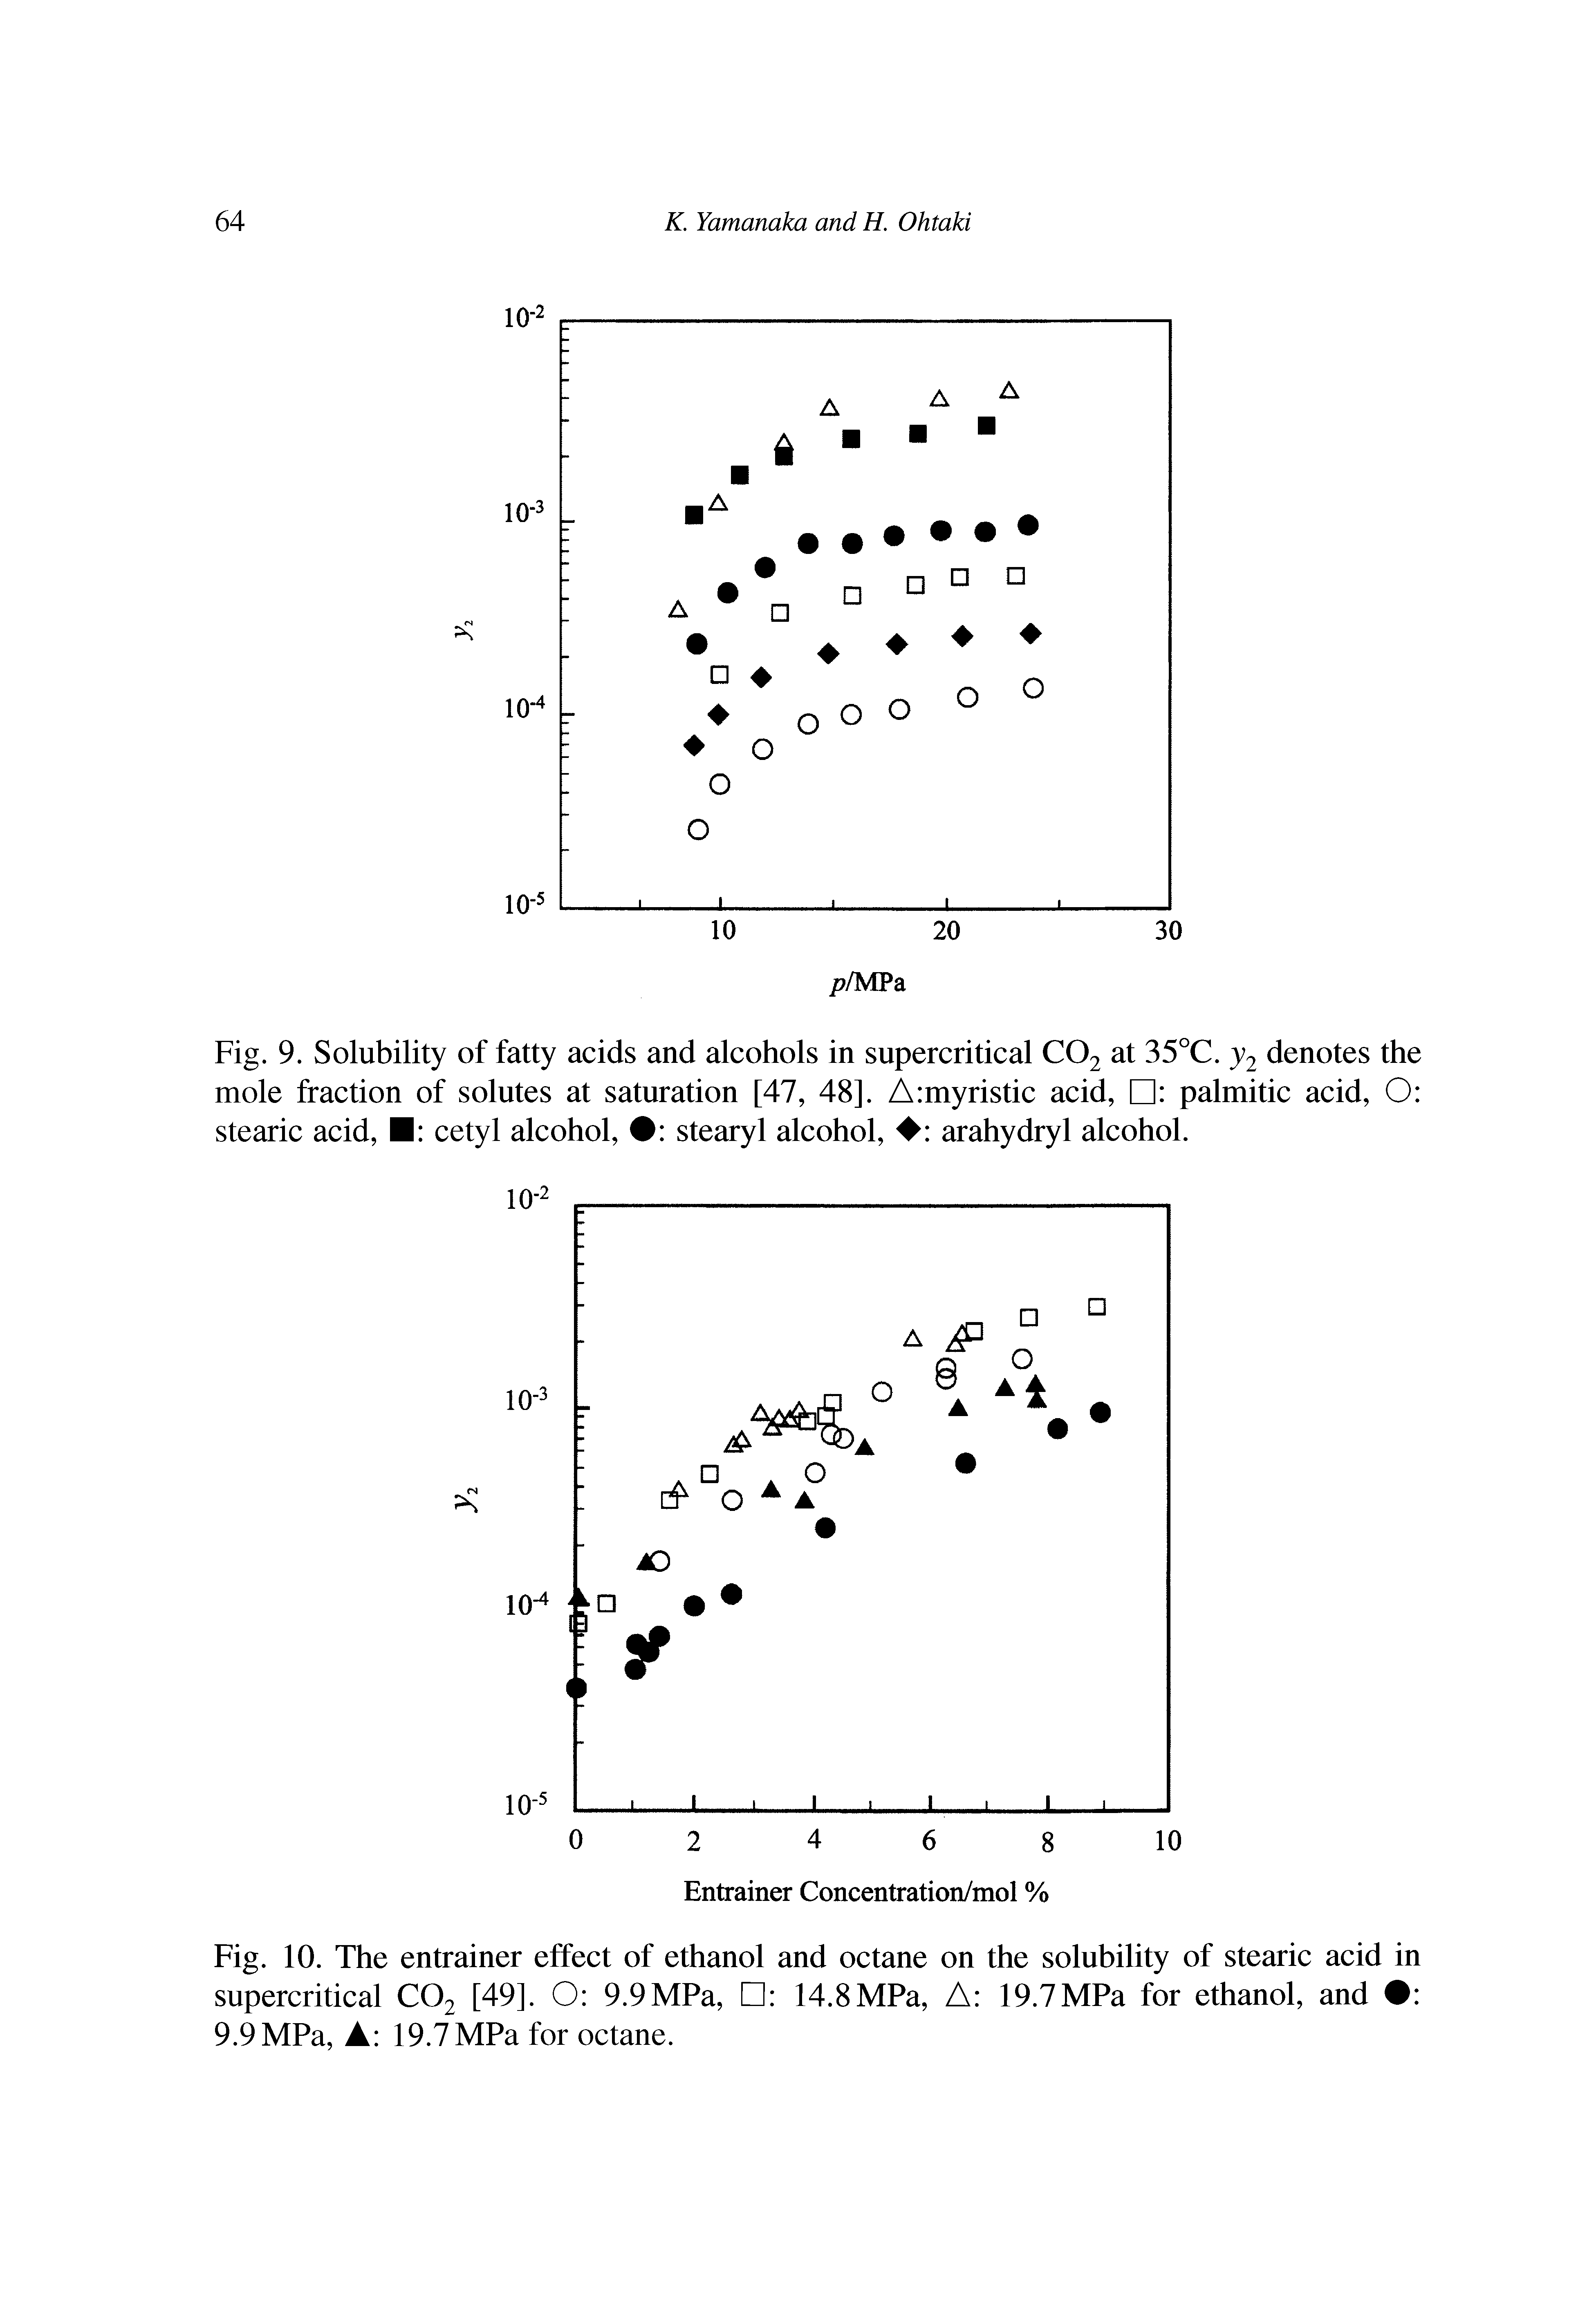 Fig. 9. Solubility of fatty acids and alcohols in supercritical CO2 at 35°C. 2 denotes the mole fraction of solutes at saturation [47, 48]. A myristic acid, palmitic acid, O stearic acid, cetyl alcohol, stearyl alcohol, arahydryl alcohol.